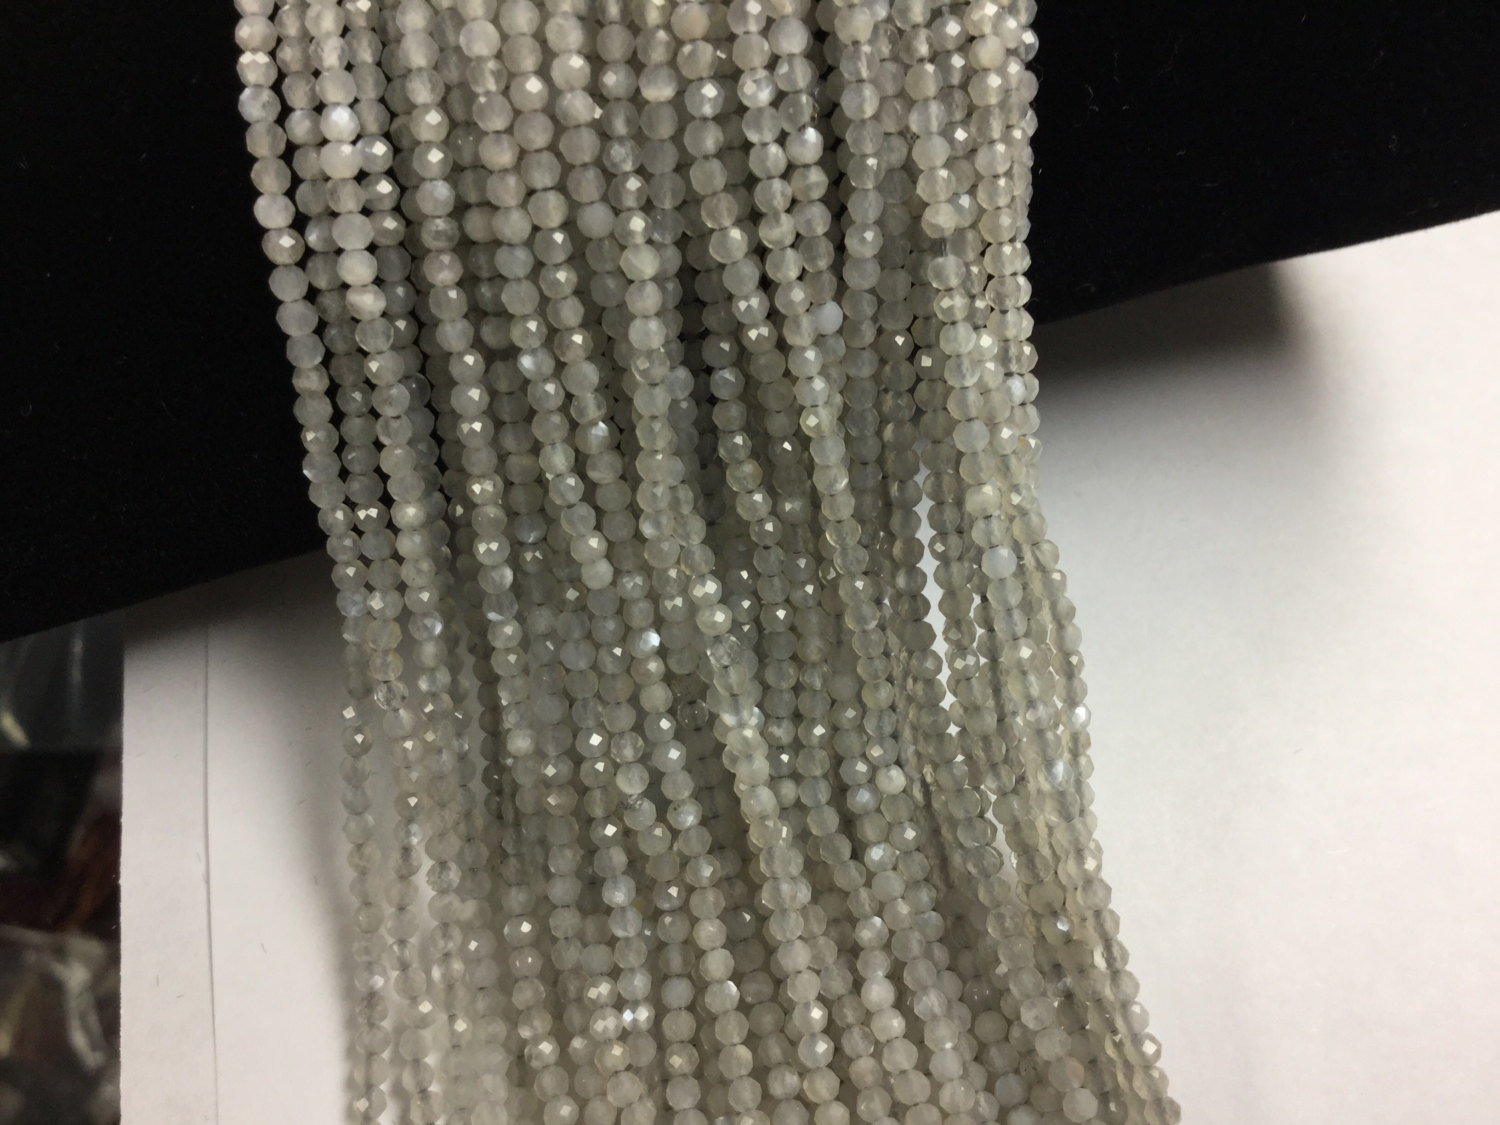 Grey Moonstone Rondelles Faceted